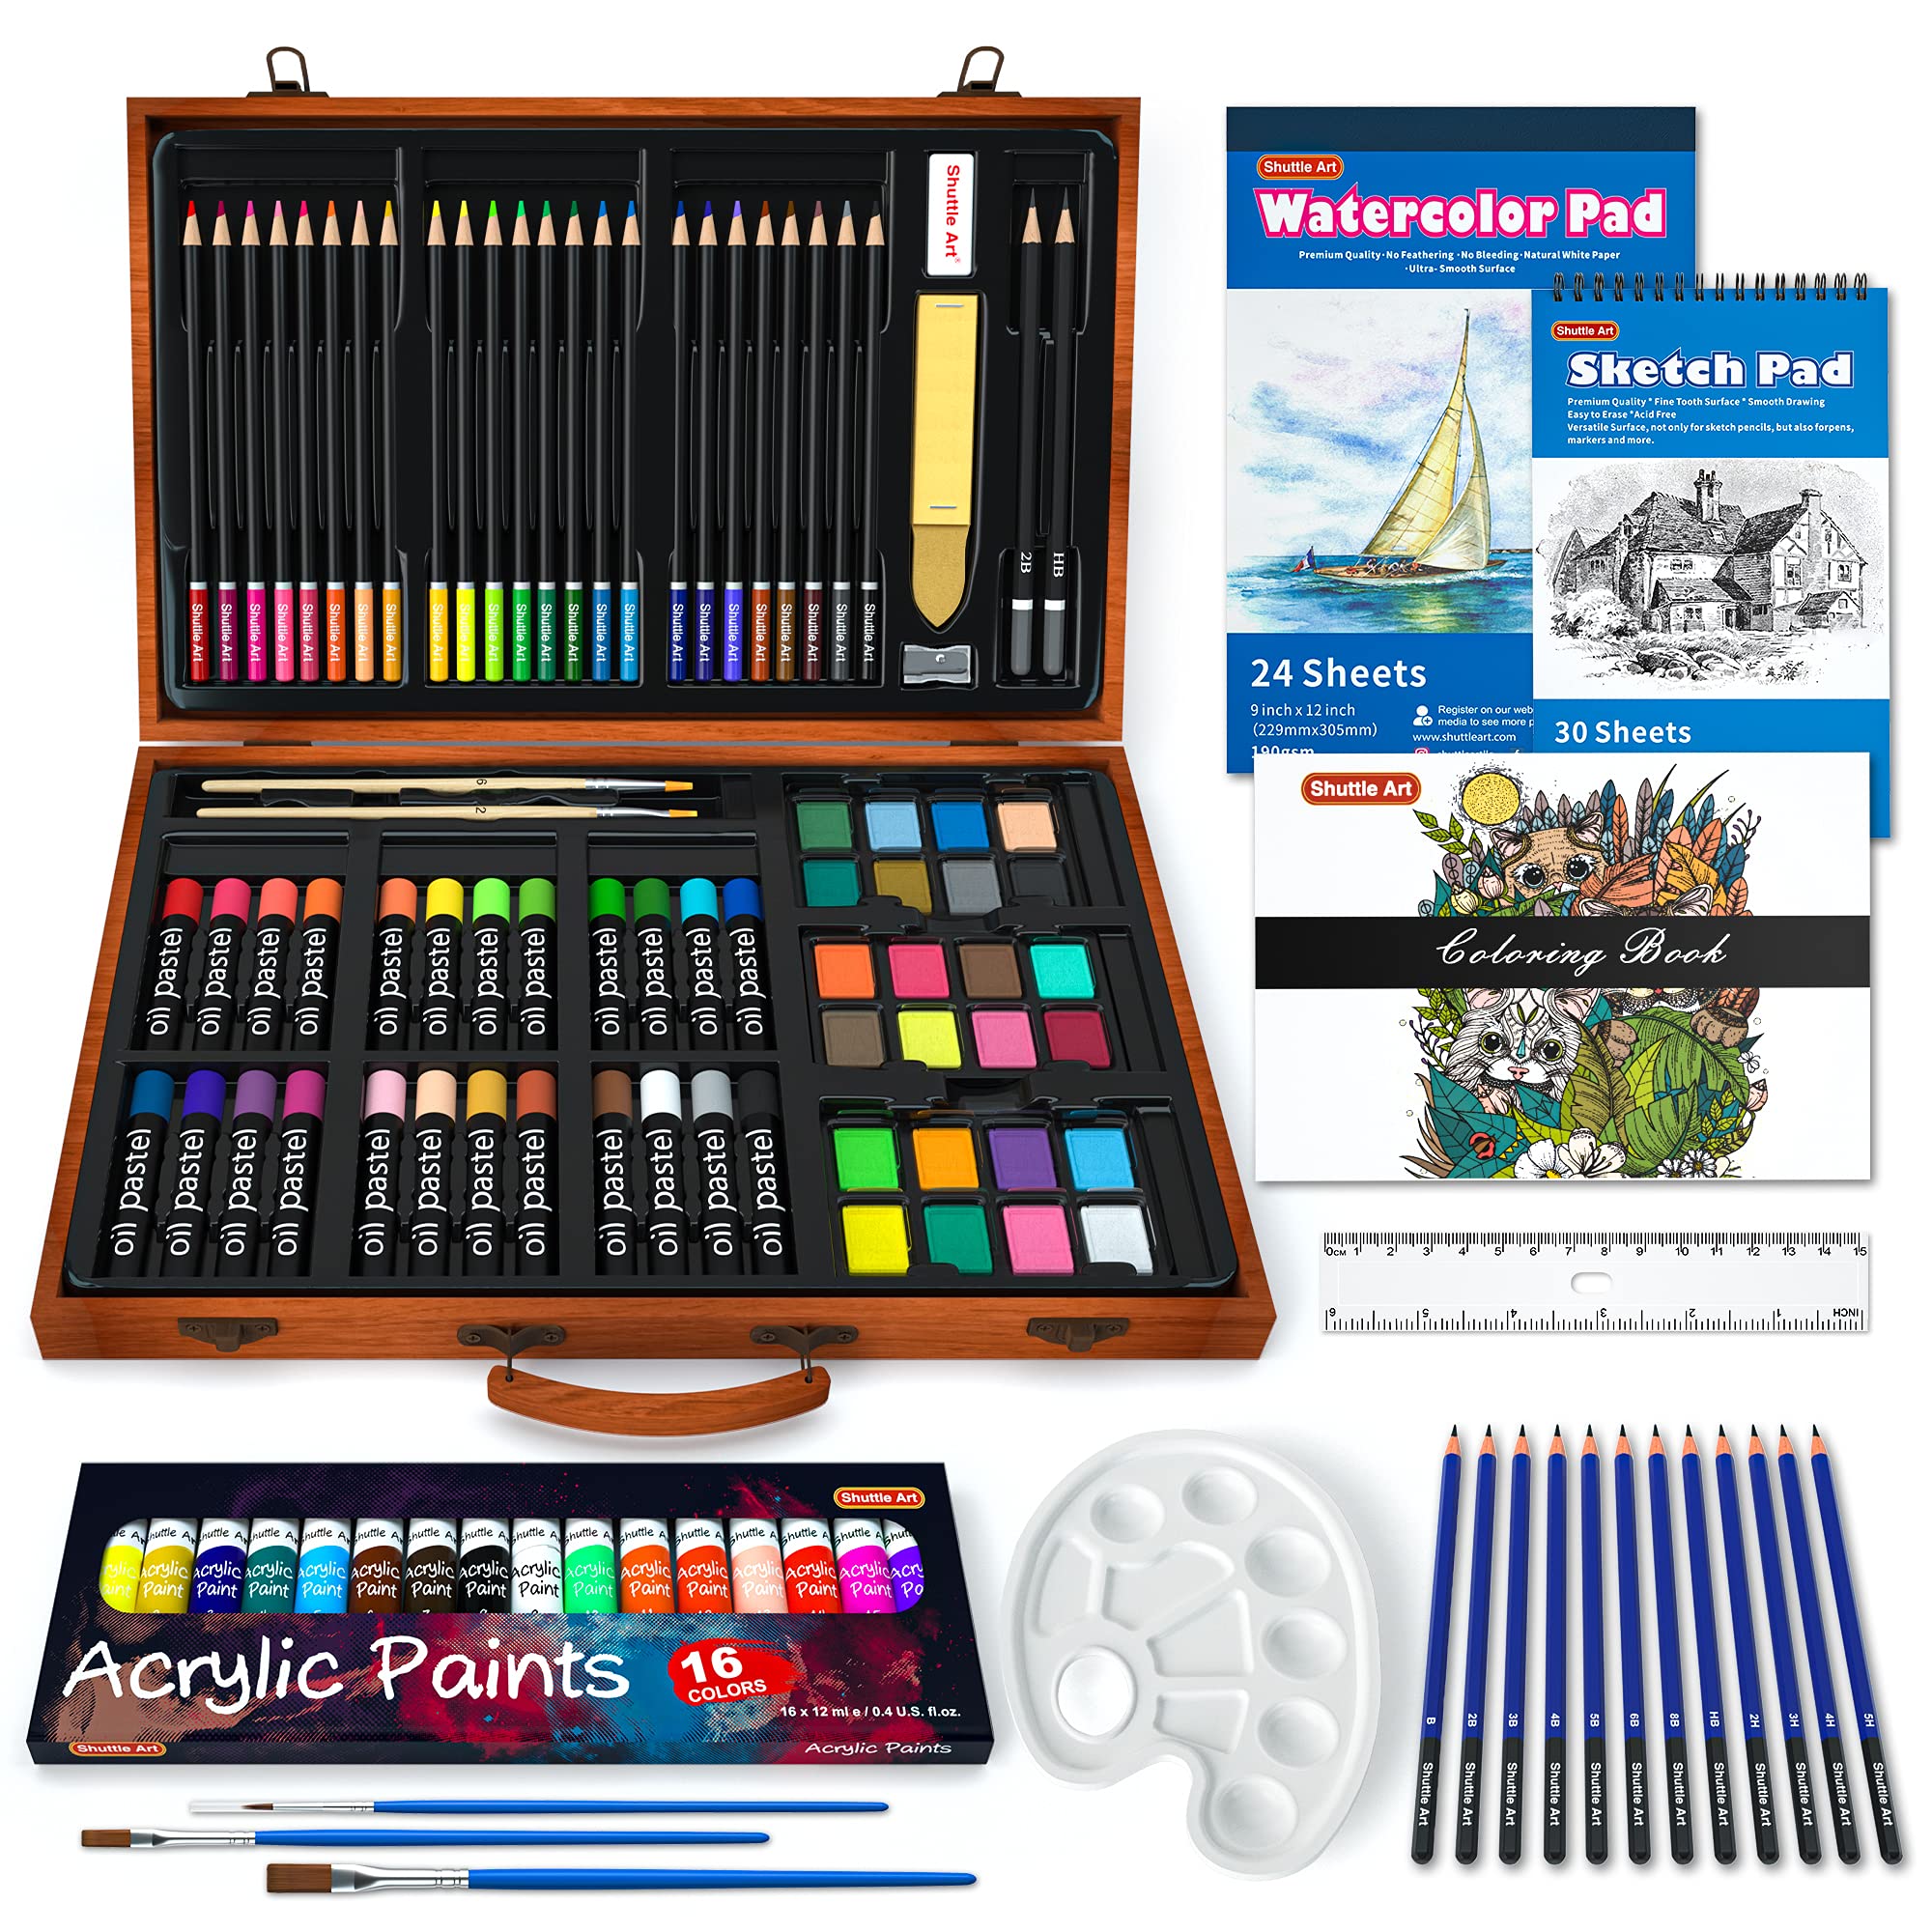 Shuttle Art 118 Piece Deluxe Art Set, Art Supplies in Wooden Case, Painting Drawing Art Kit with Acrylic Paint Pencils Oil Pastels Watercolor Cakes Coloring Book Watercolor Sketch Pad for Kids Adults